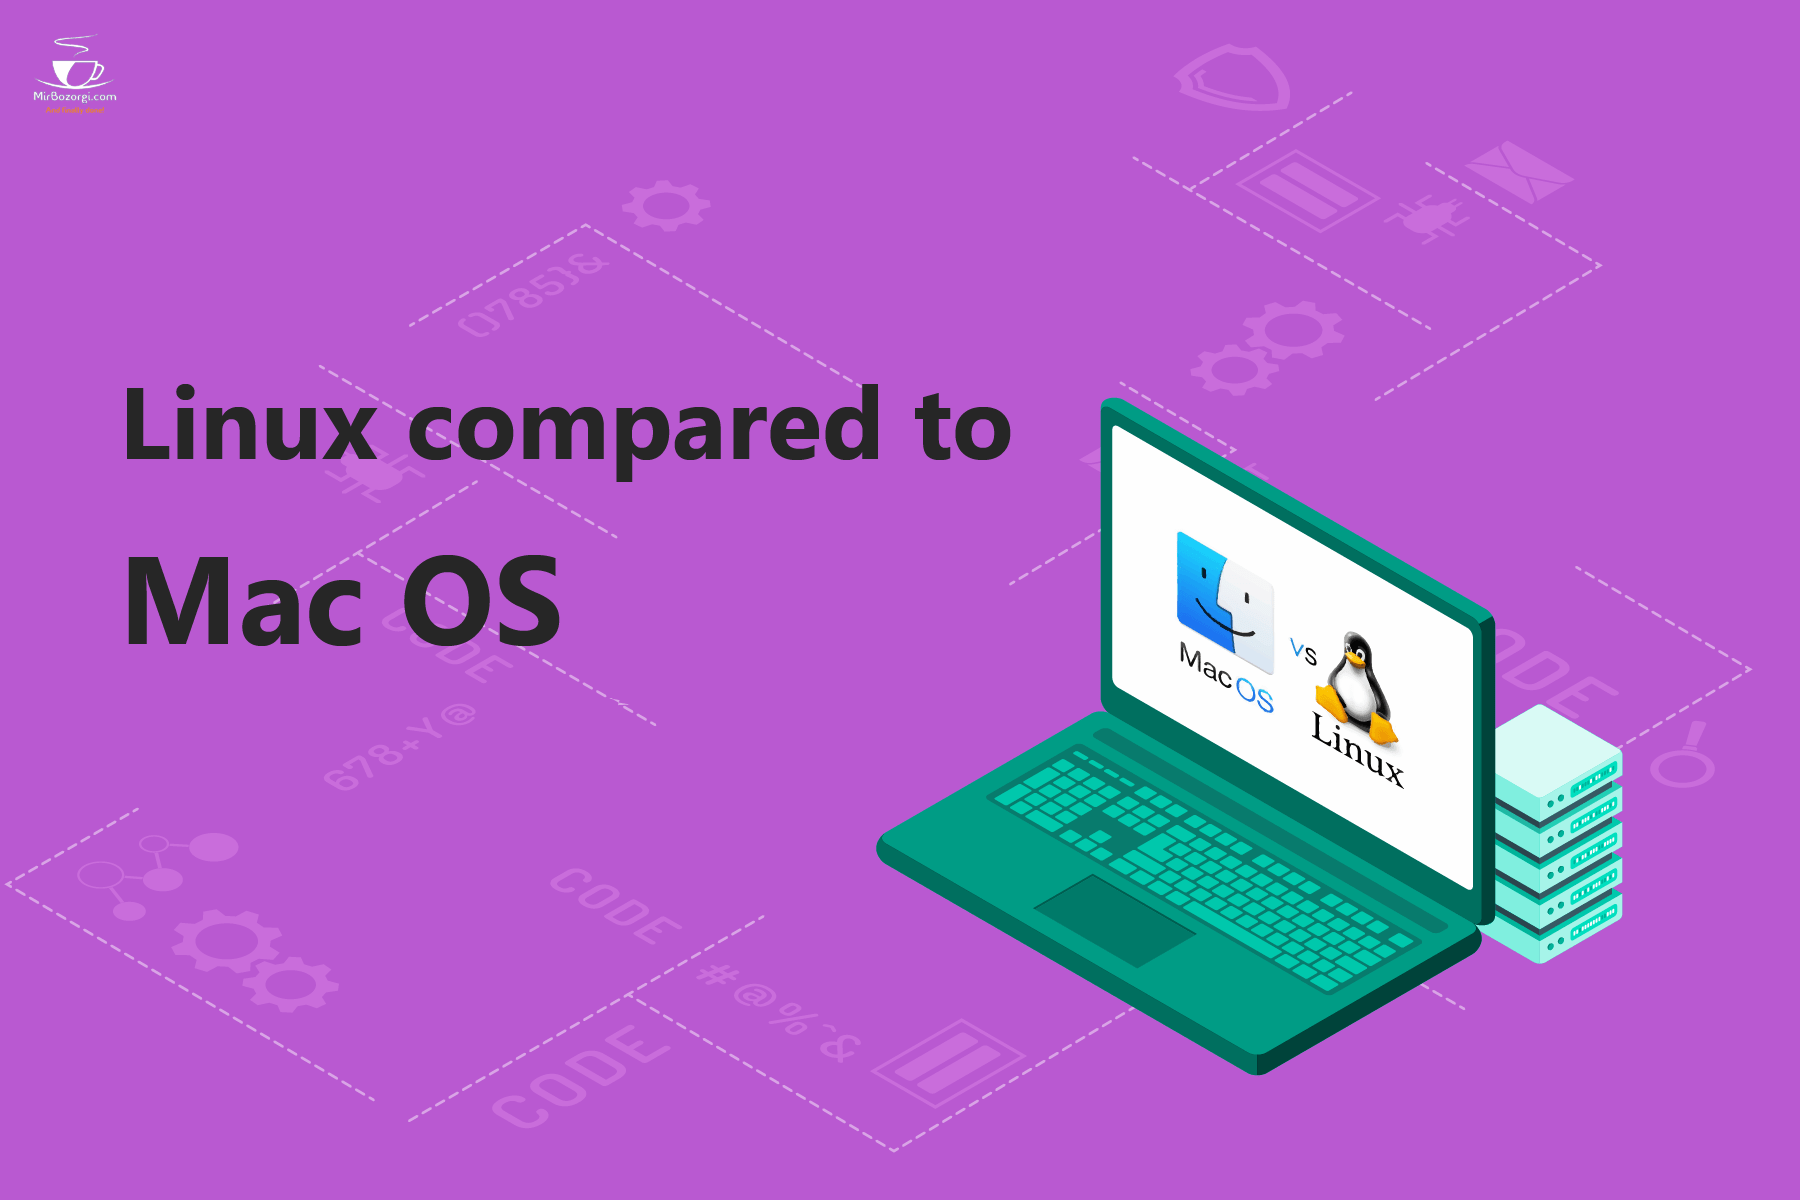 Linux compared to Mac OS